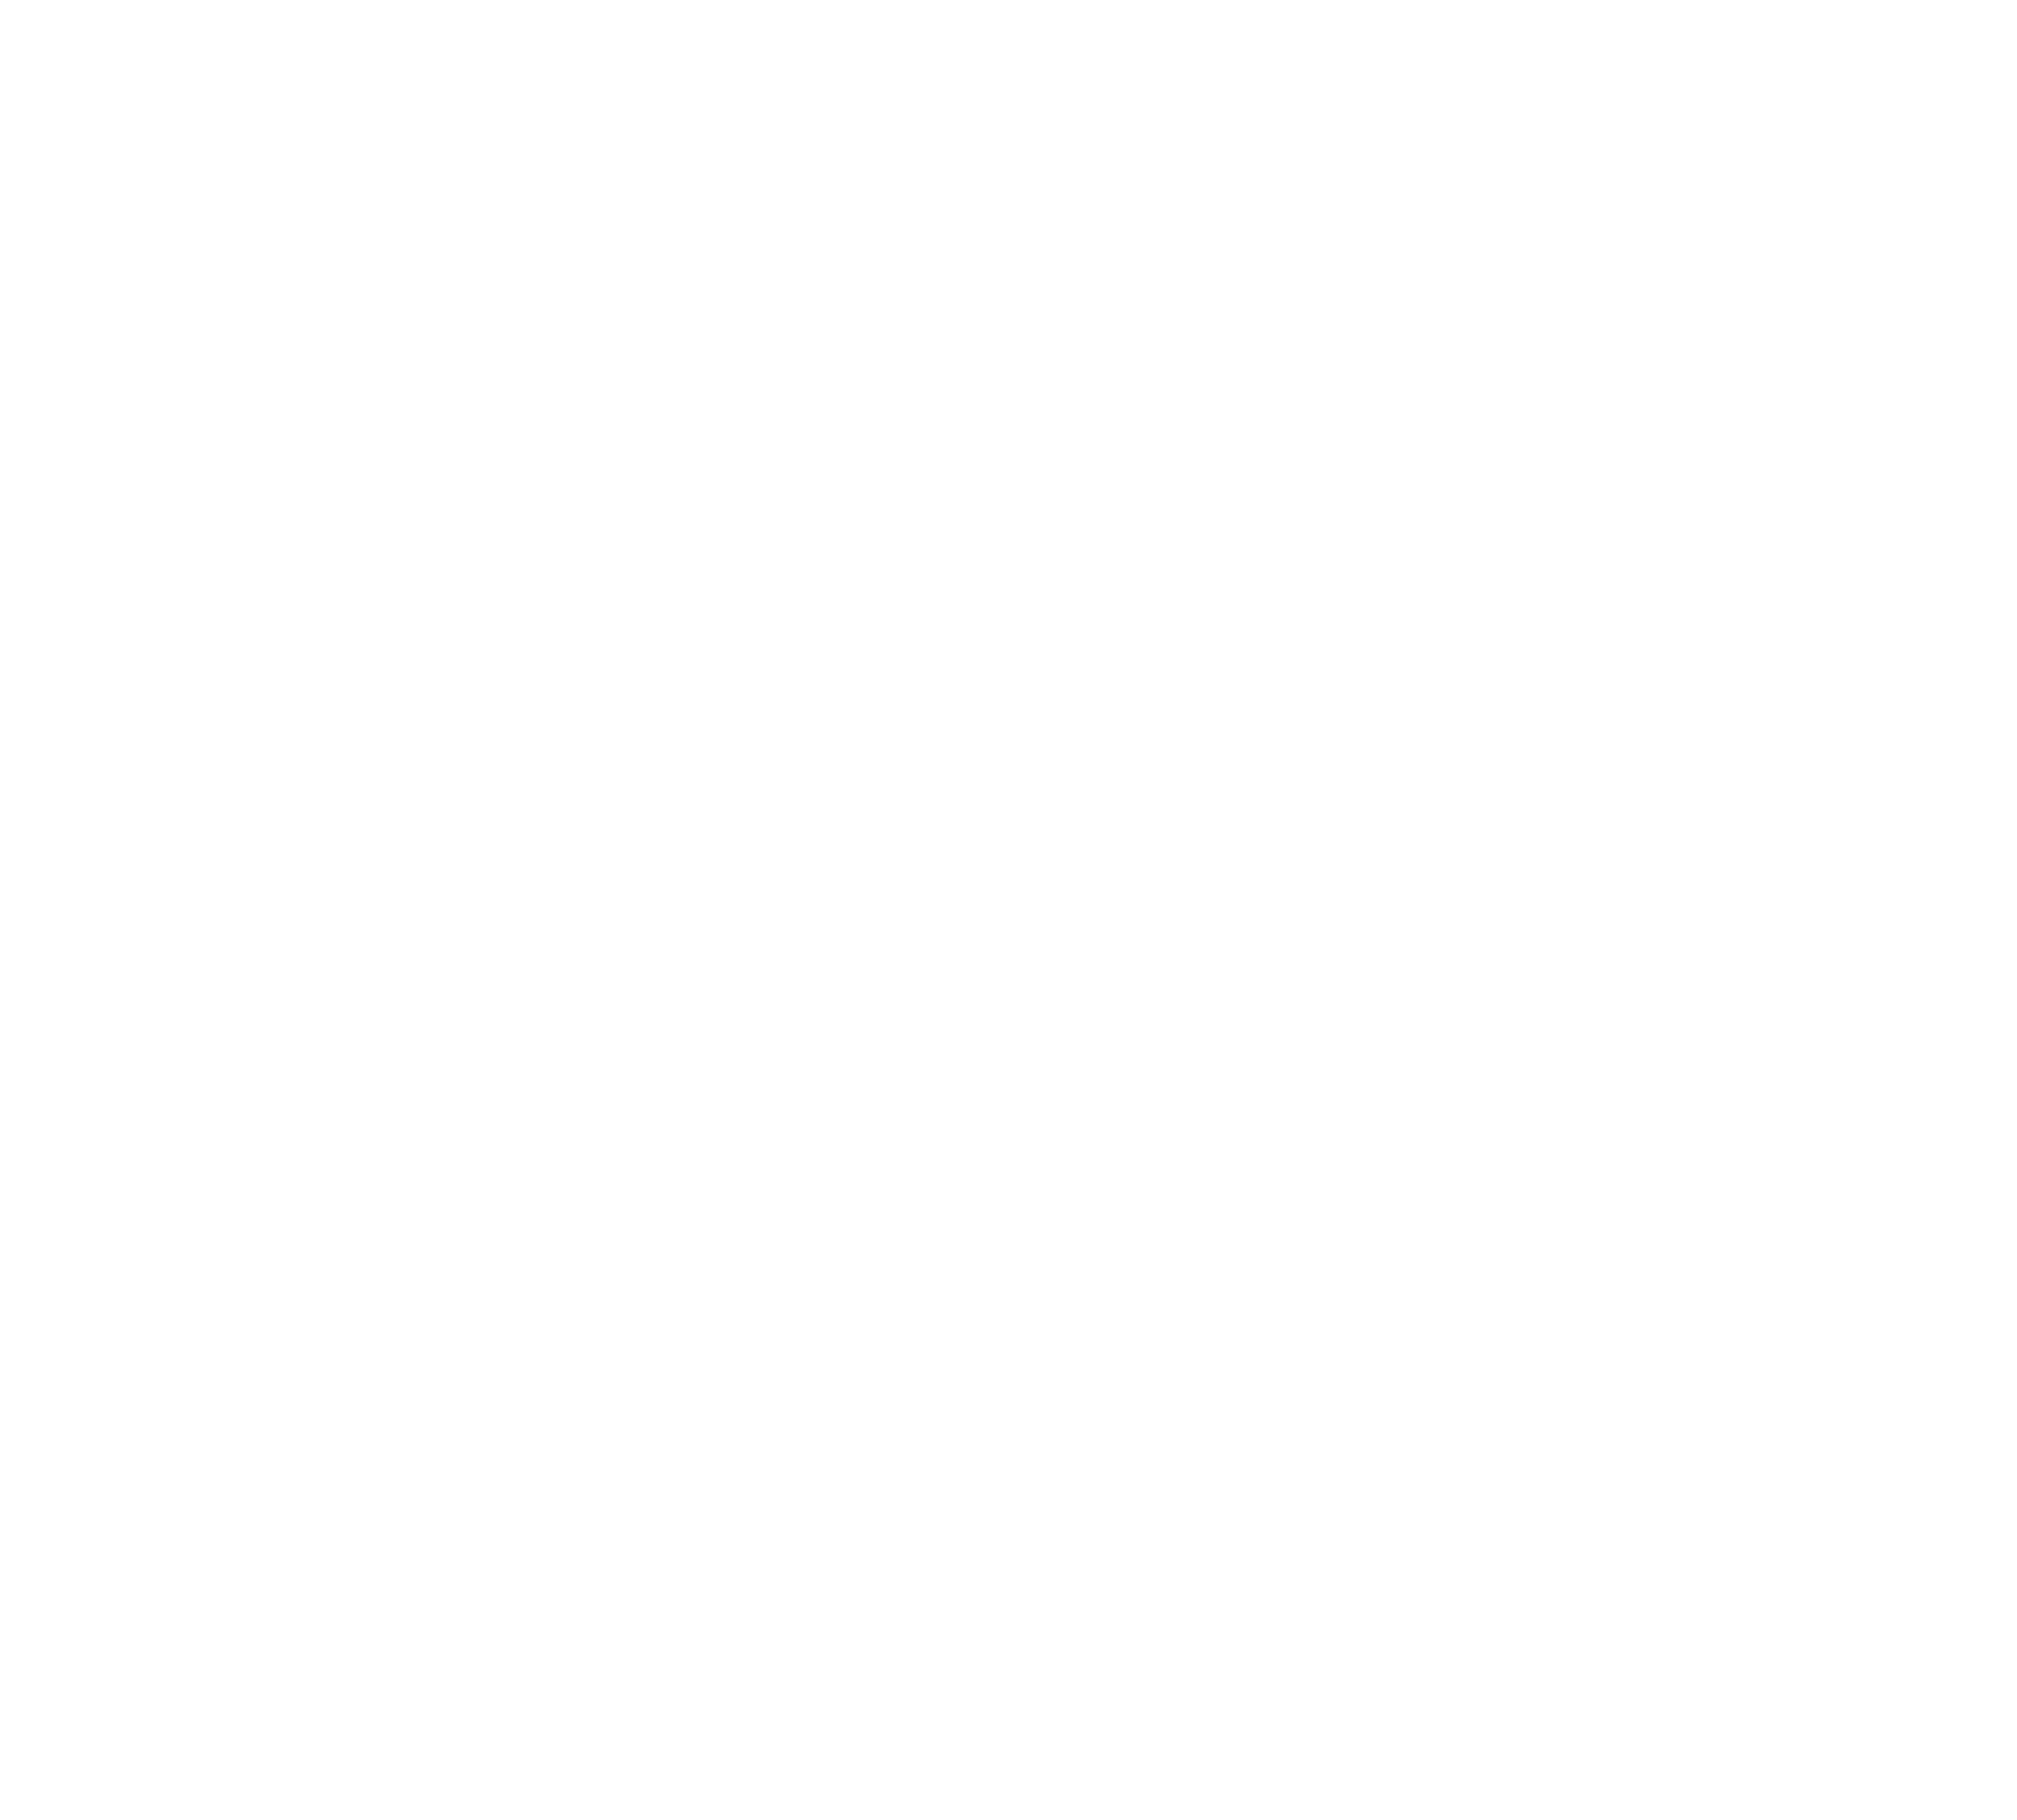 Message in the bulb